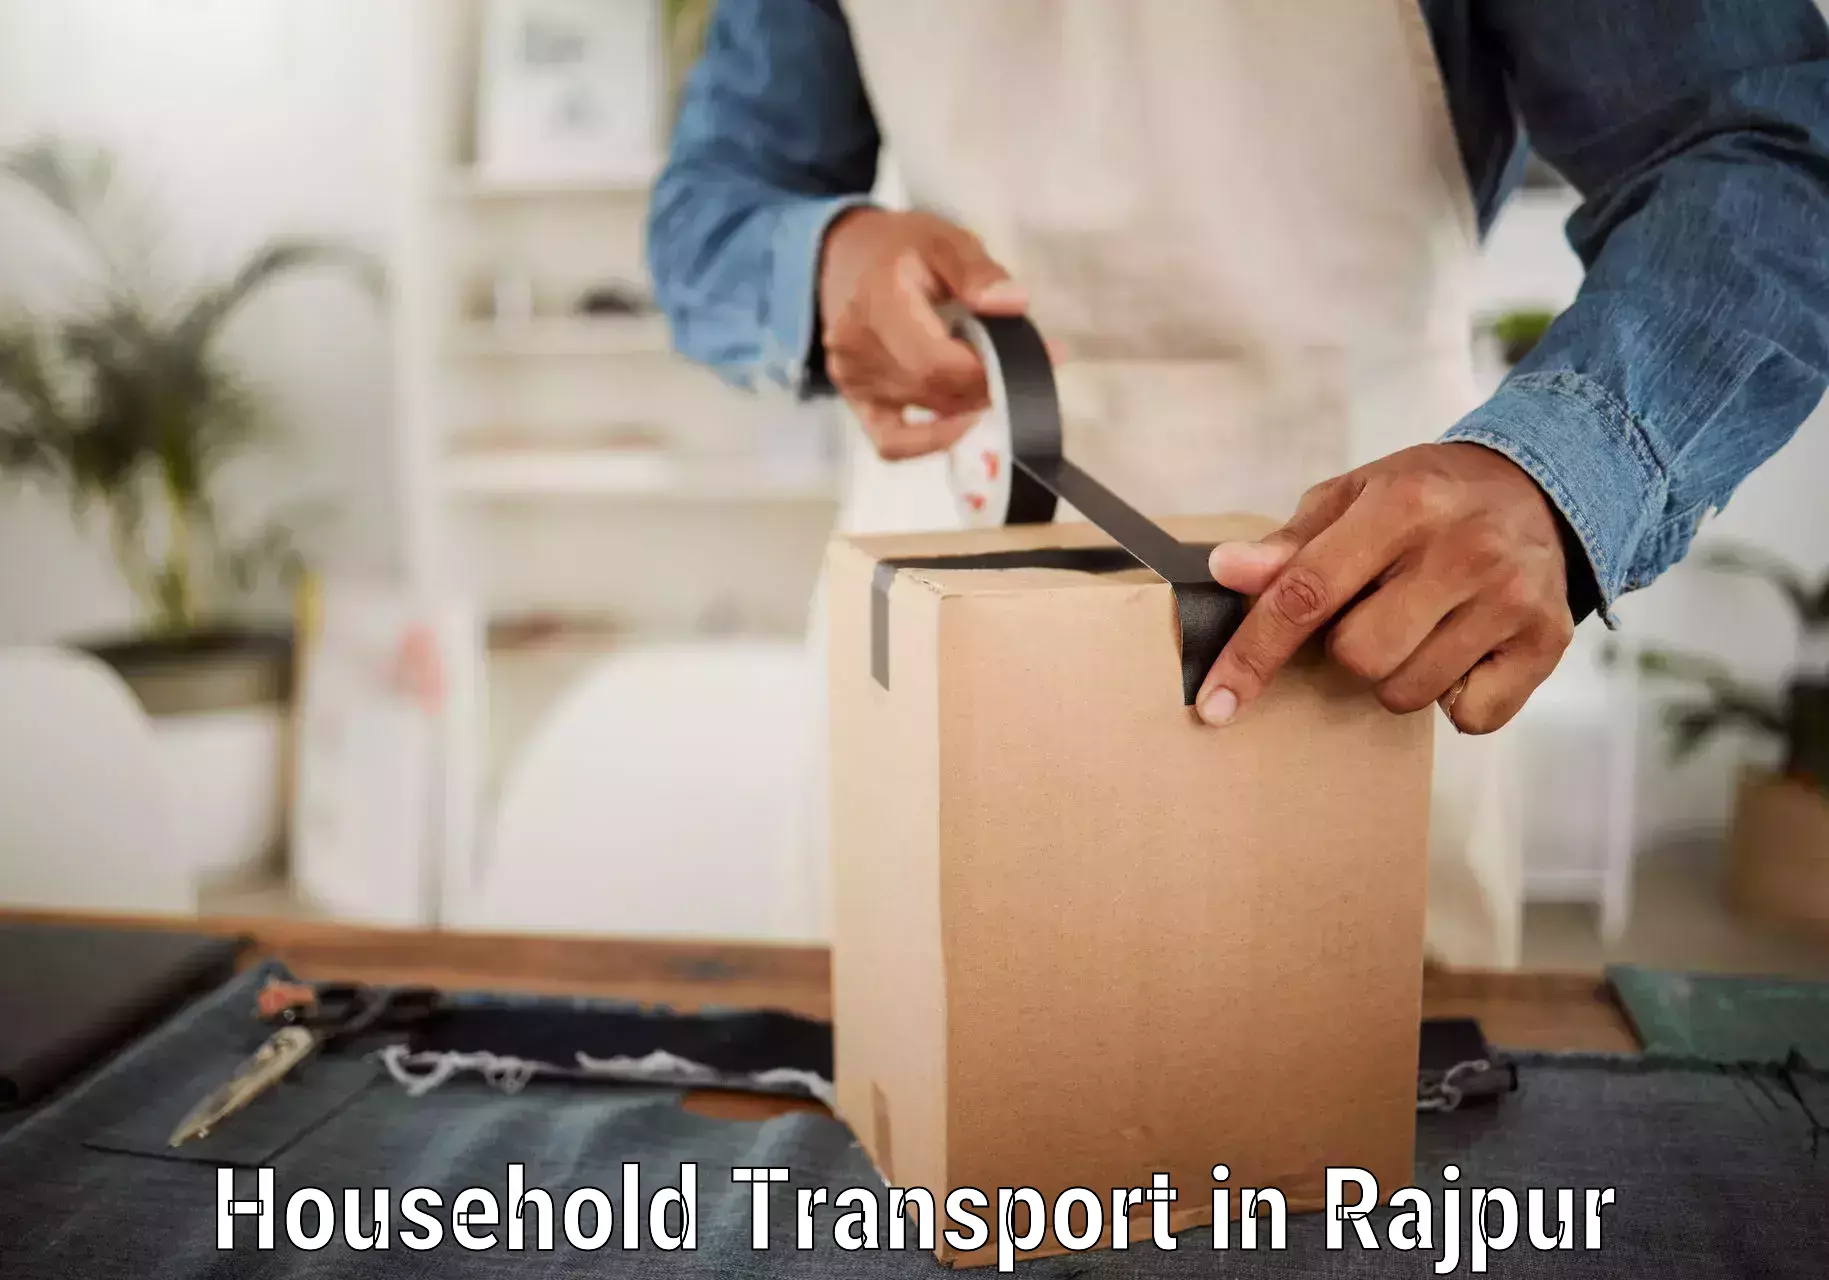 Household transport solutions in Rajpur